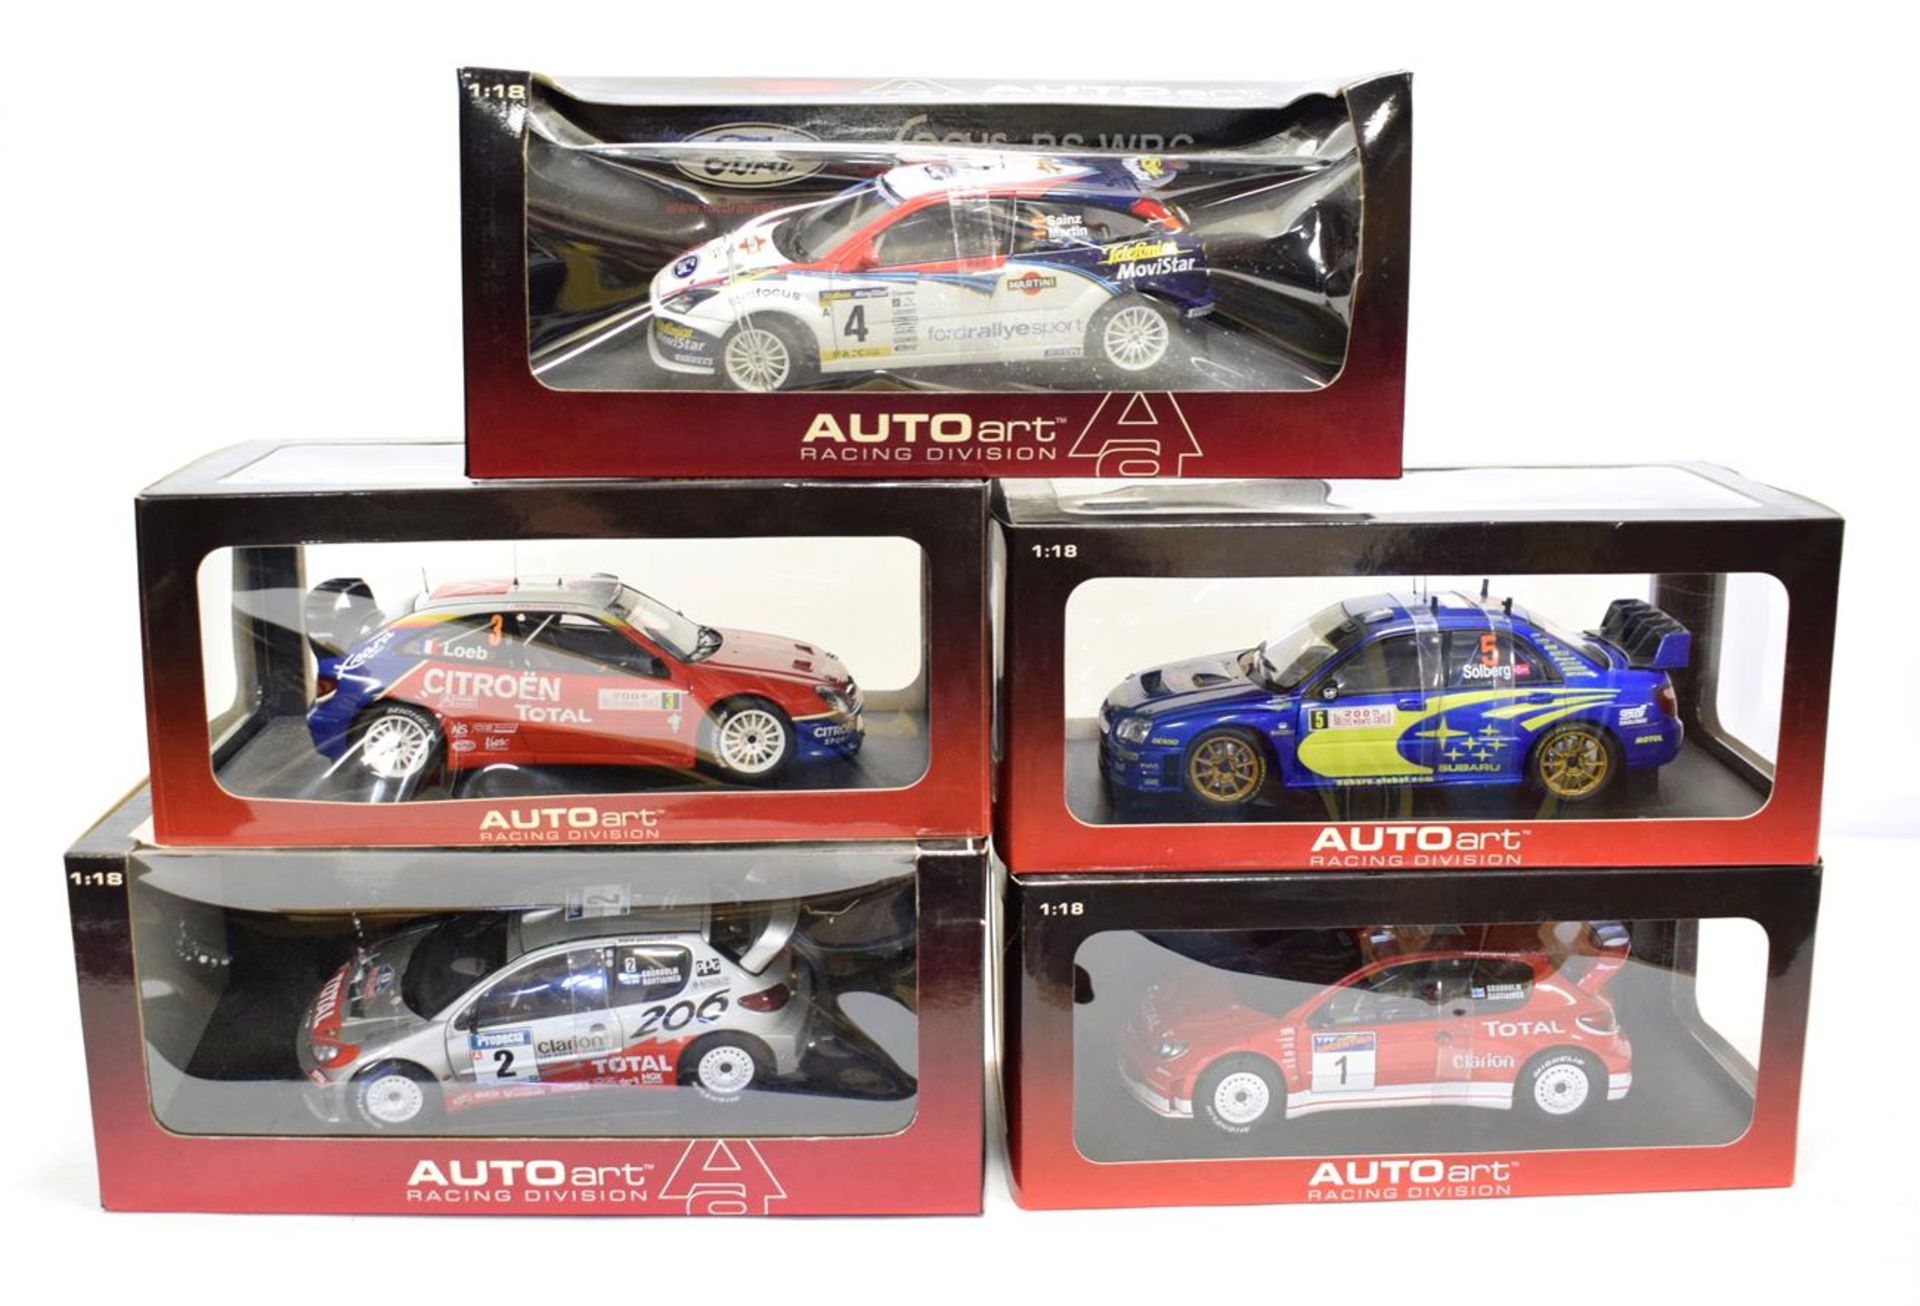 Autoart World Rally Championship Group 1:18 scale models: Ford Focus RS, Peugeot 206, another